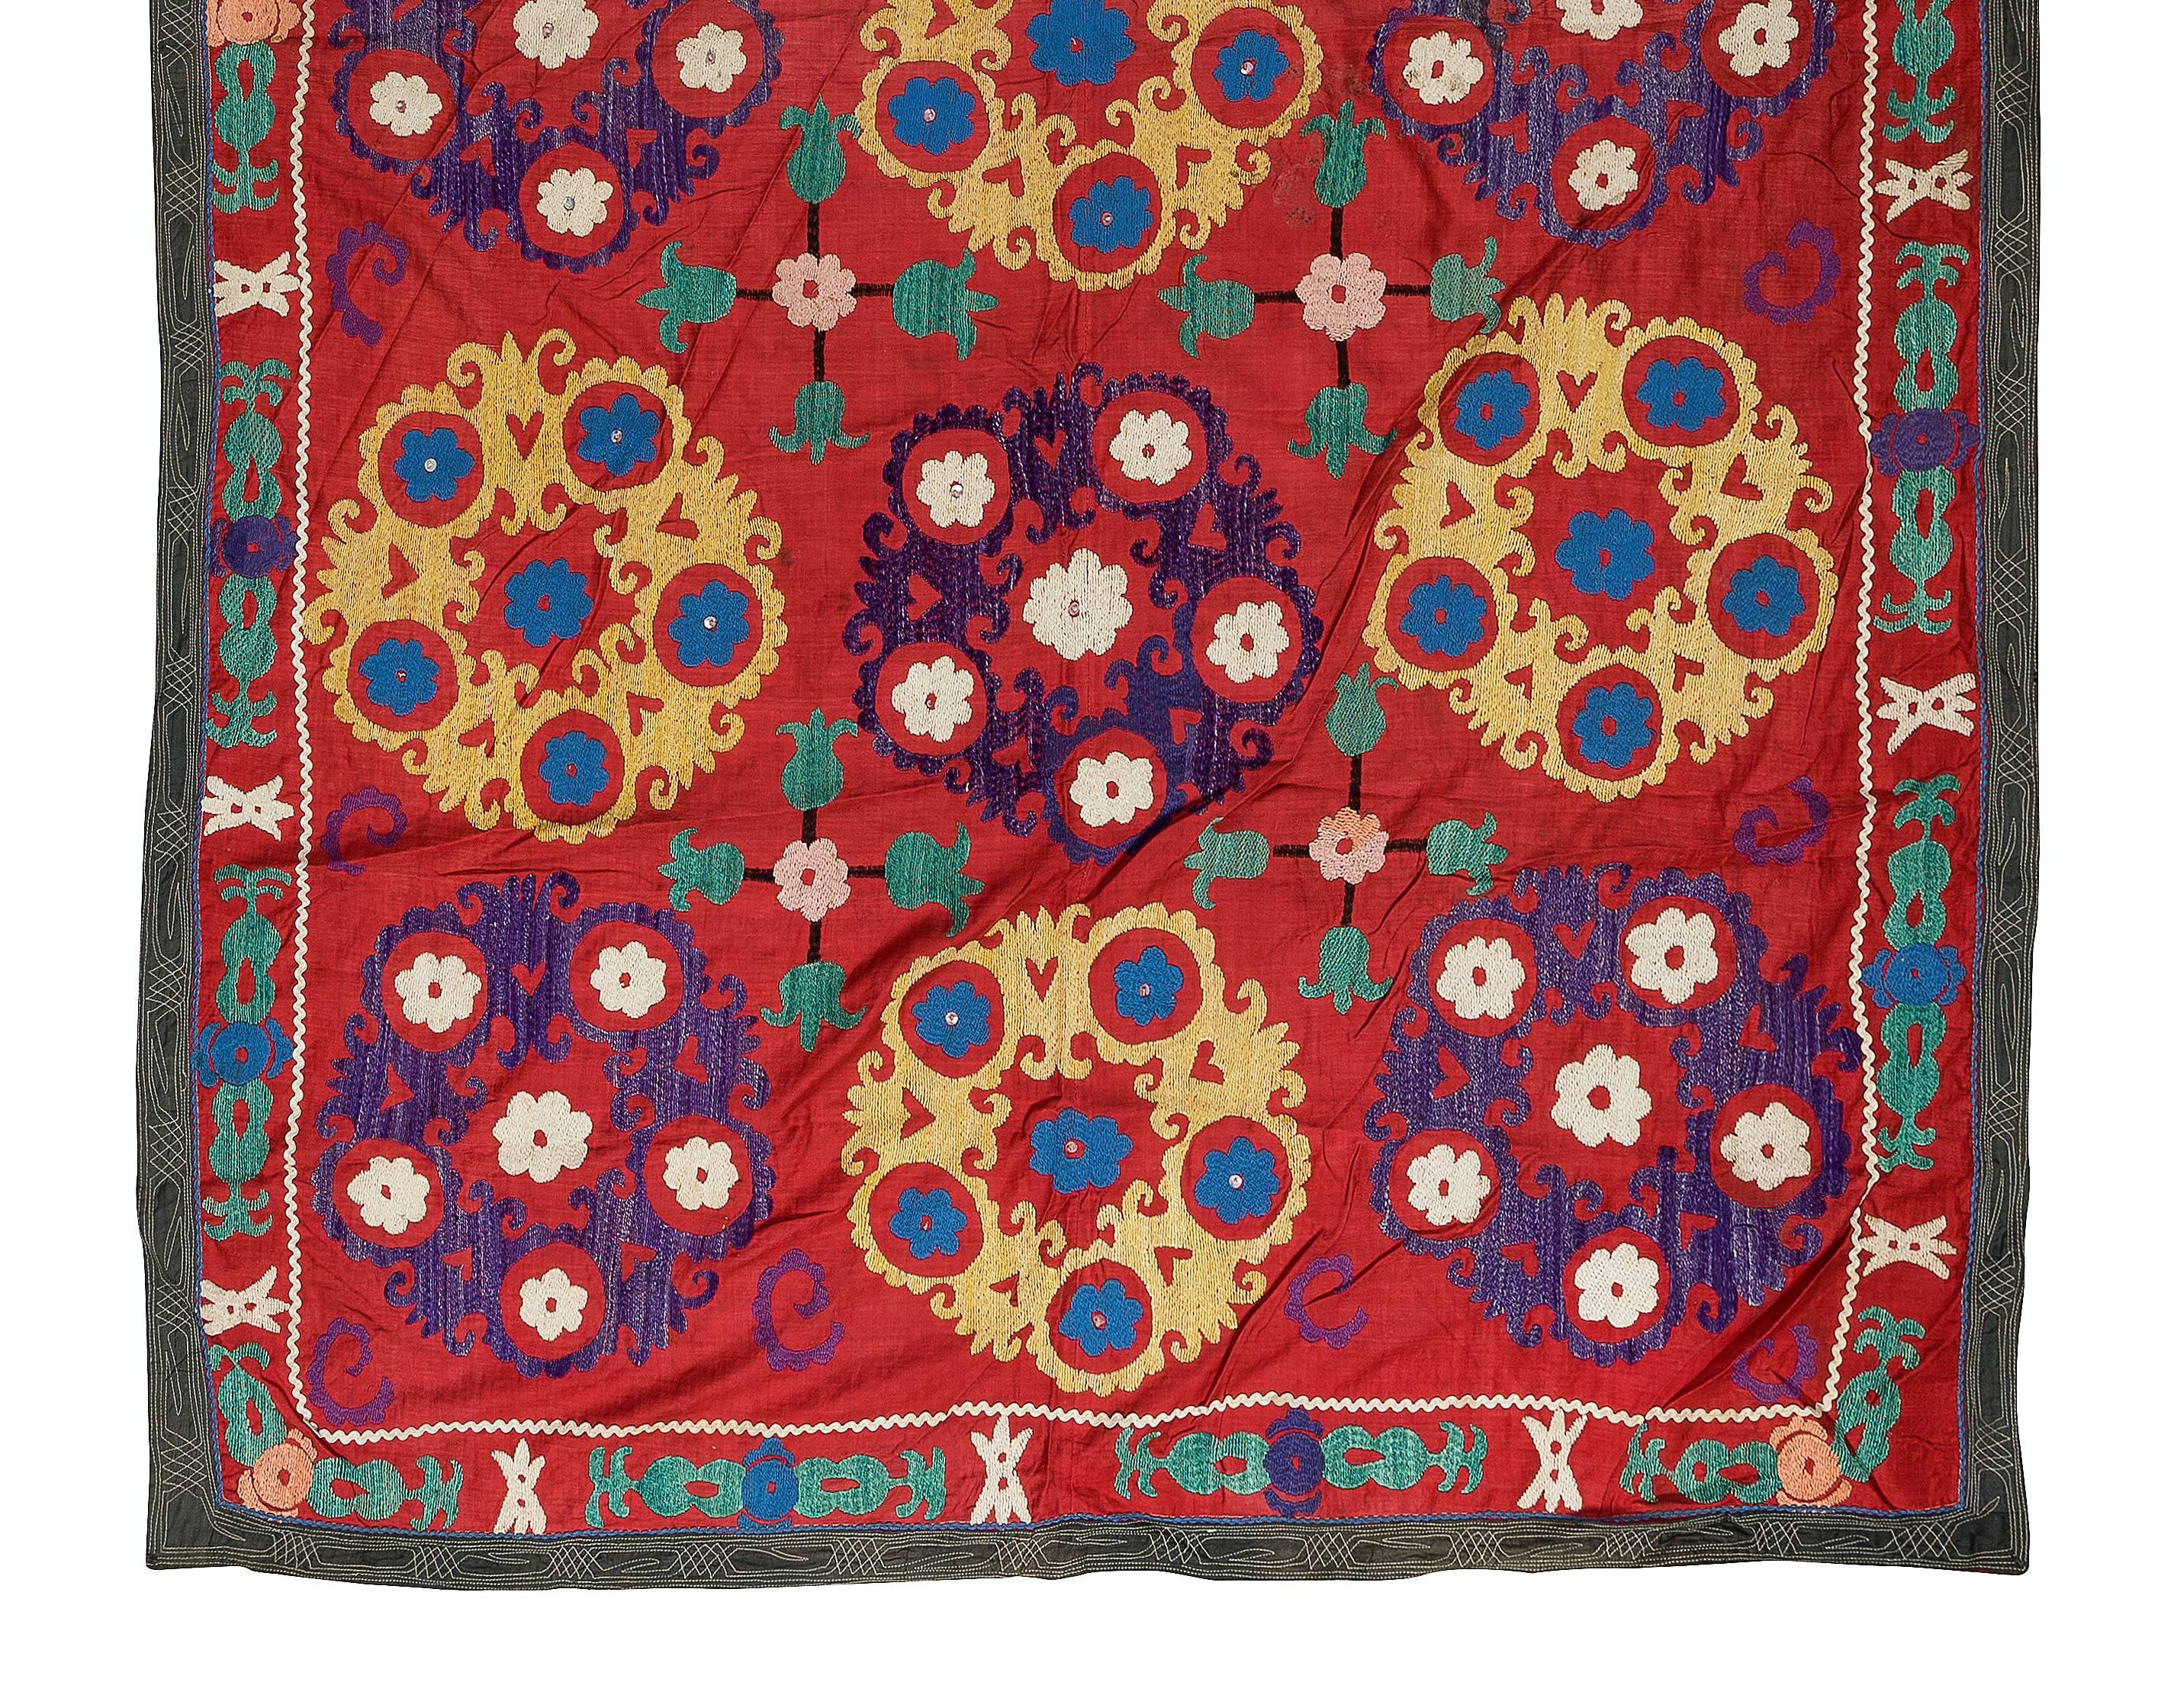 Embroidered 4.6x7 Ft Vintage Silk Embroidery Bed Cover, Uzbek Suzani Wall Hanging in Red For Sale